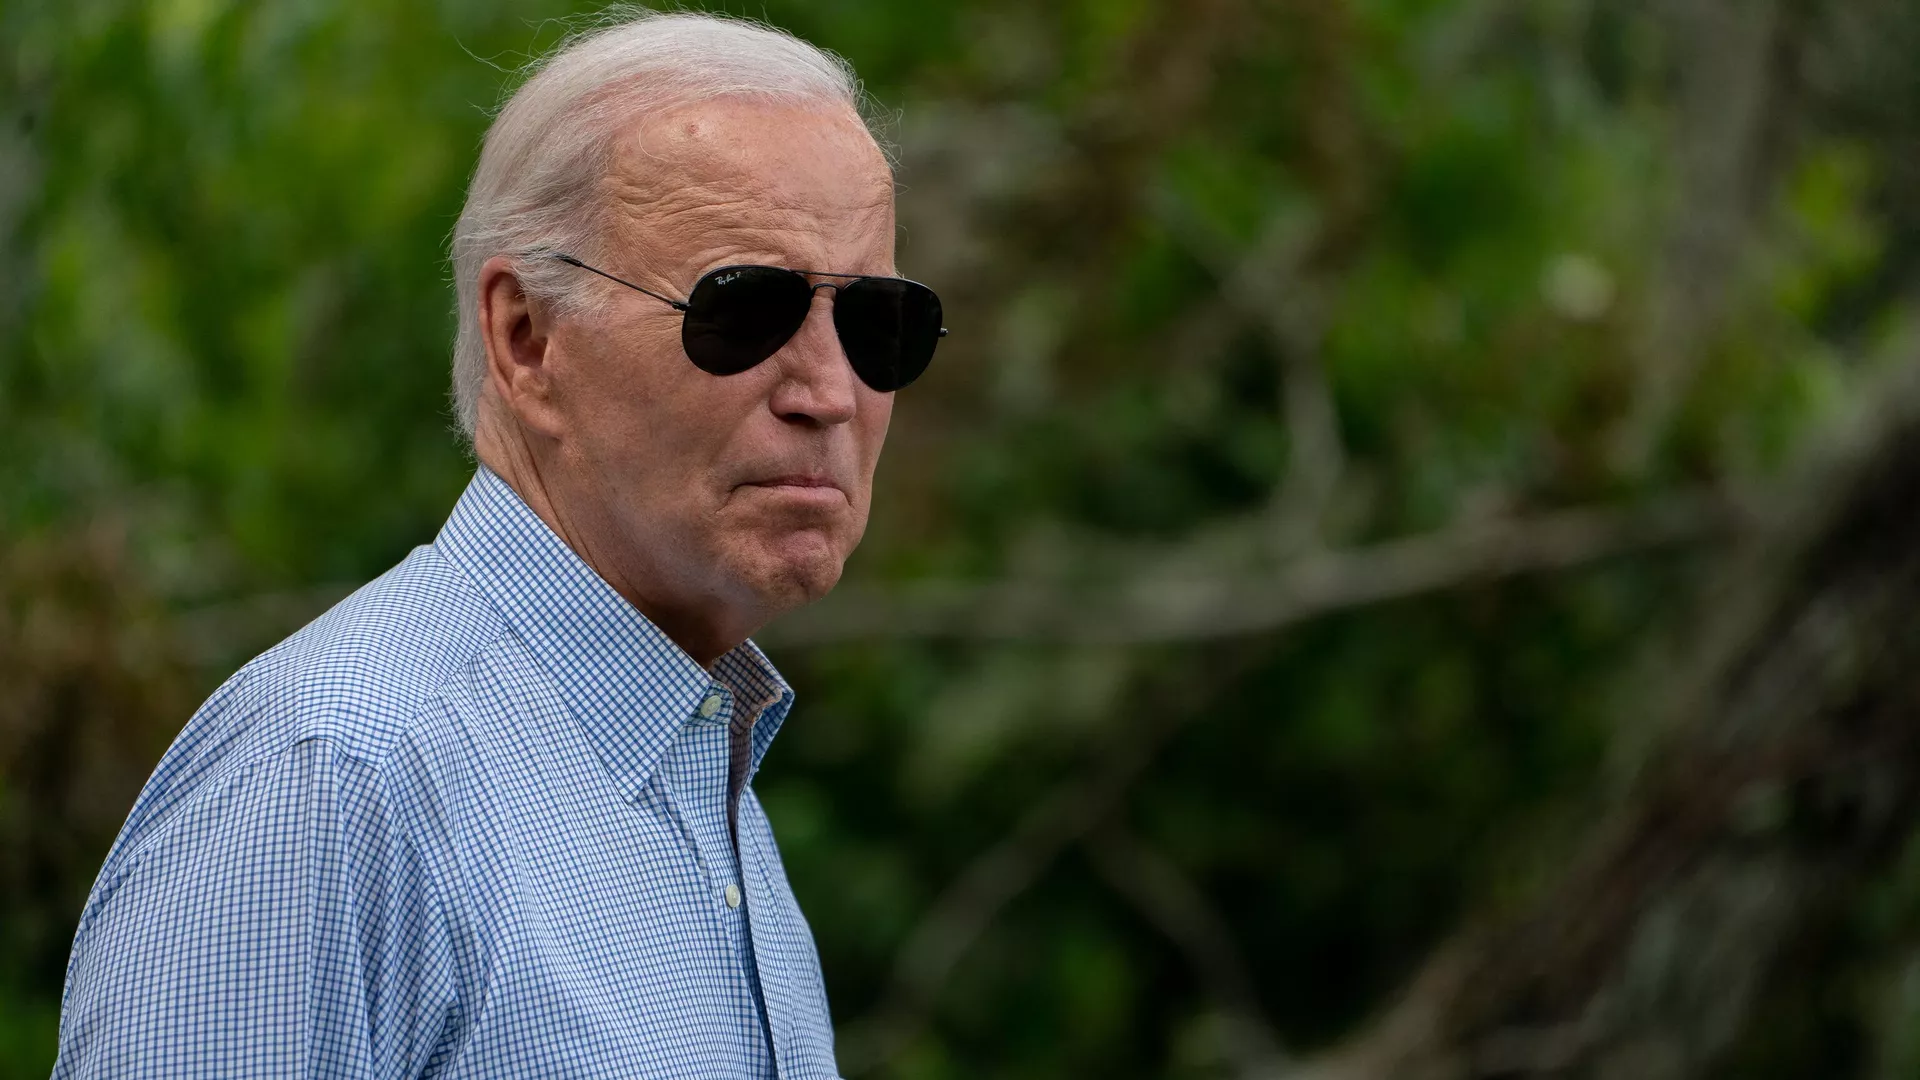 Internet Rips Biden’s ‘Tight Schedule’ Excuse For Not Visiting Ohio Train Wreck